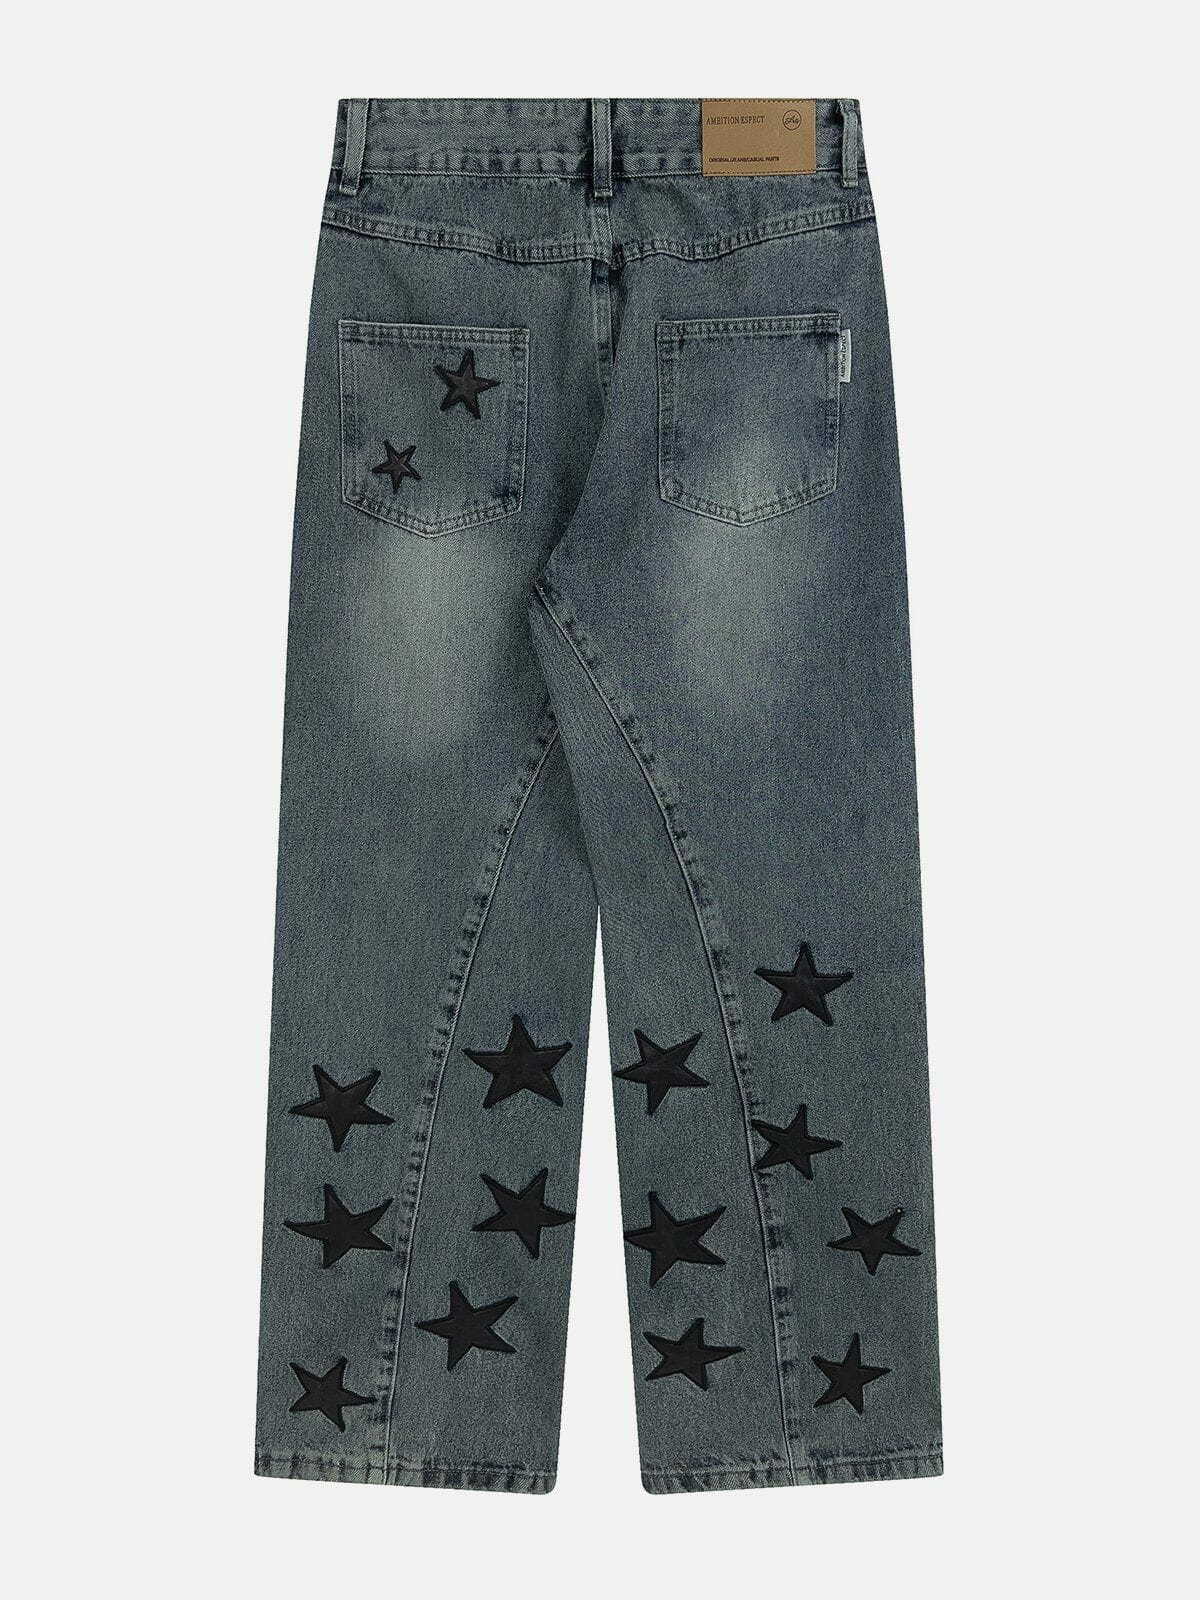 y2k star embroidered jeans retro edge & streetwear chic 1100